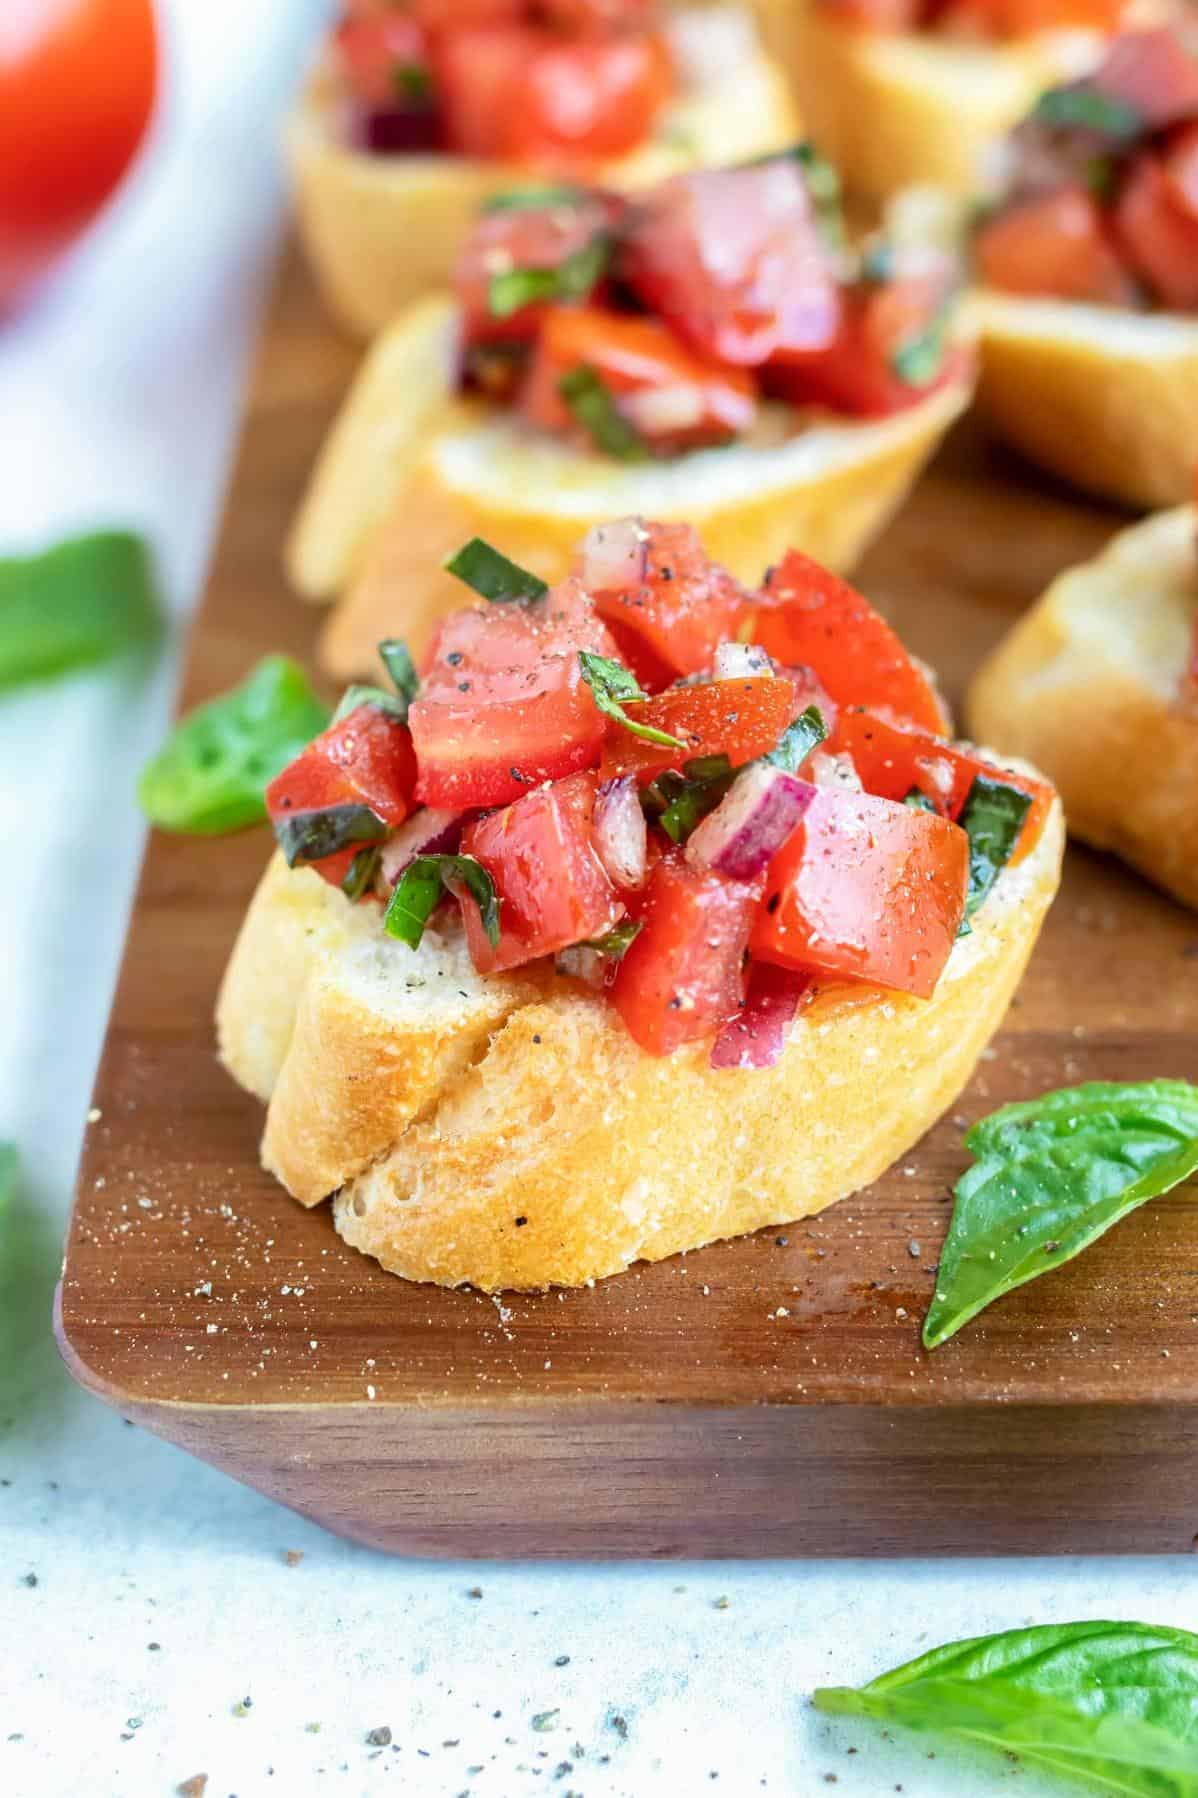  Toasted bread topped with a flavorful tomato mixture? Yes, please!